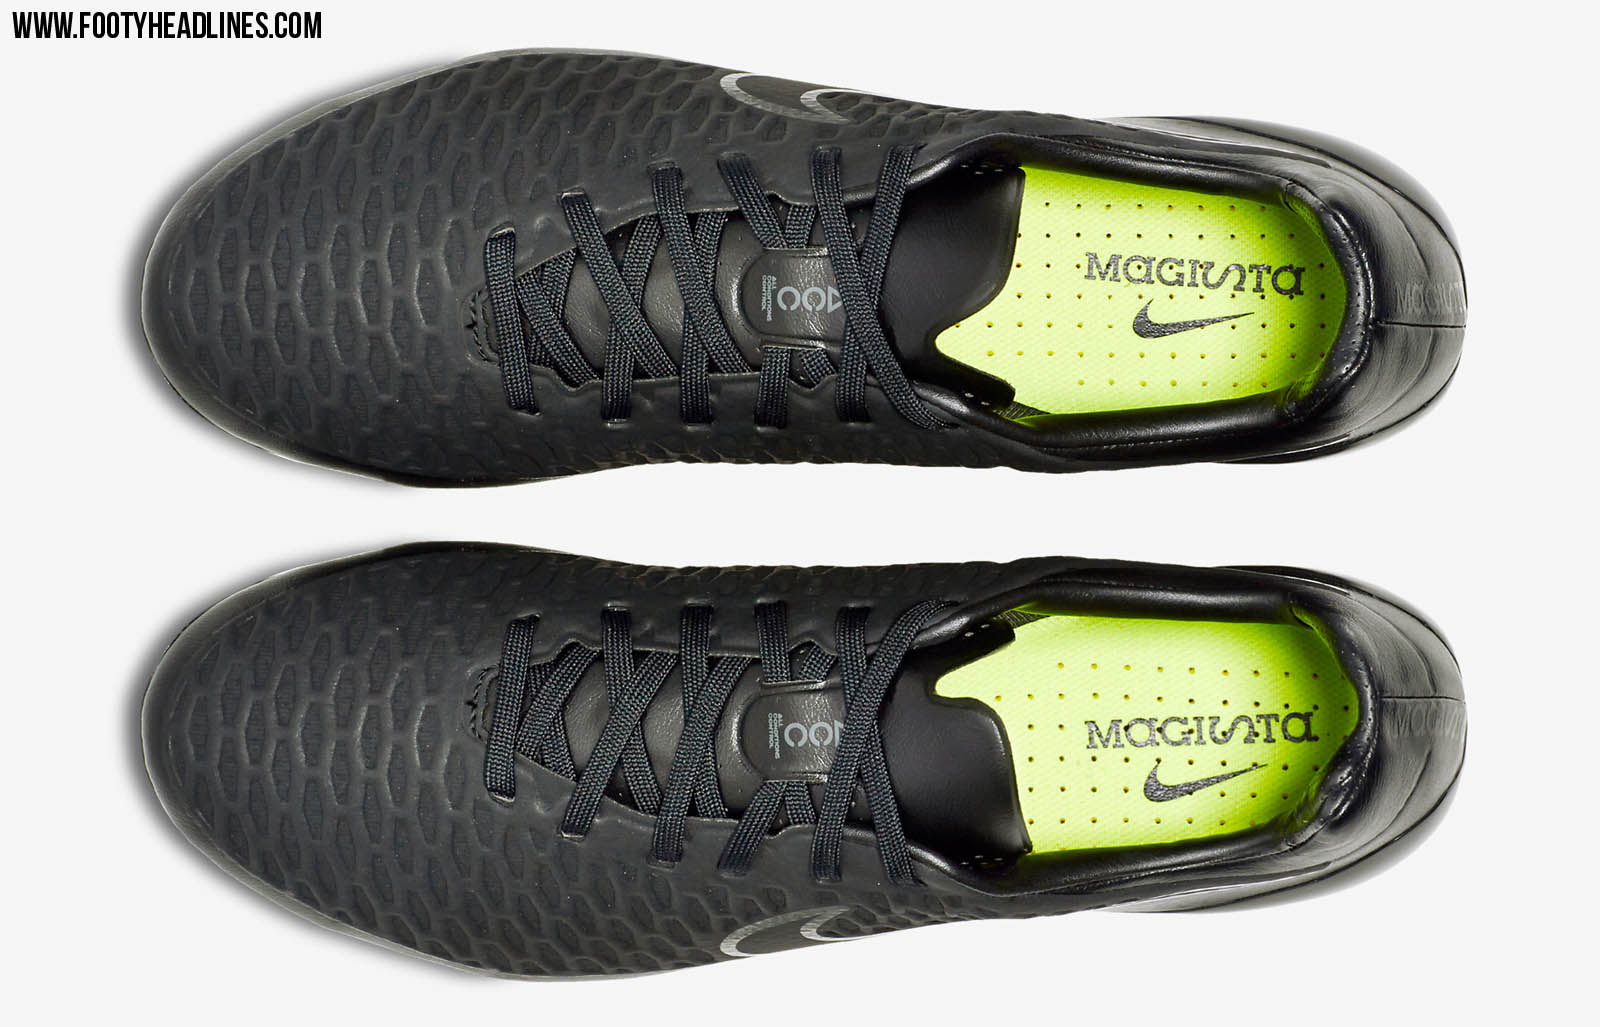 Nike Magista Cleats and Soccer Shoes ypsoccer.com